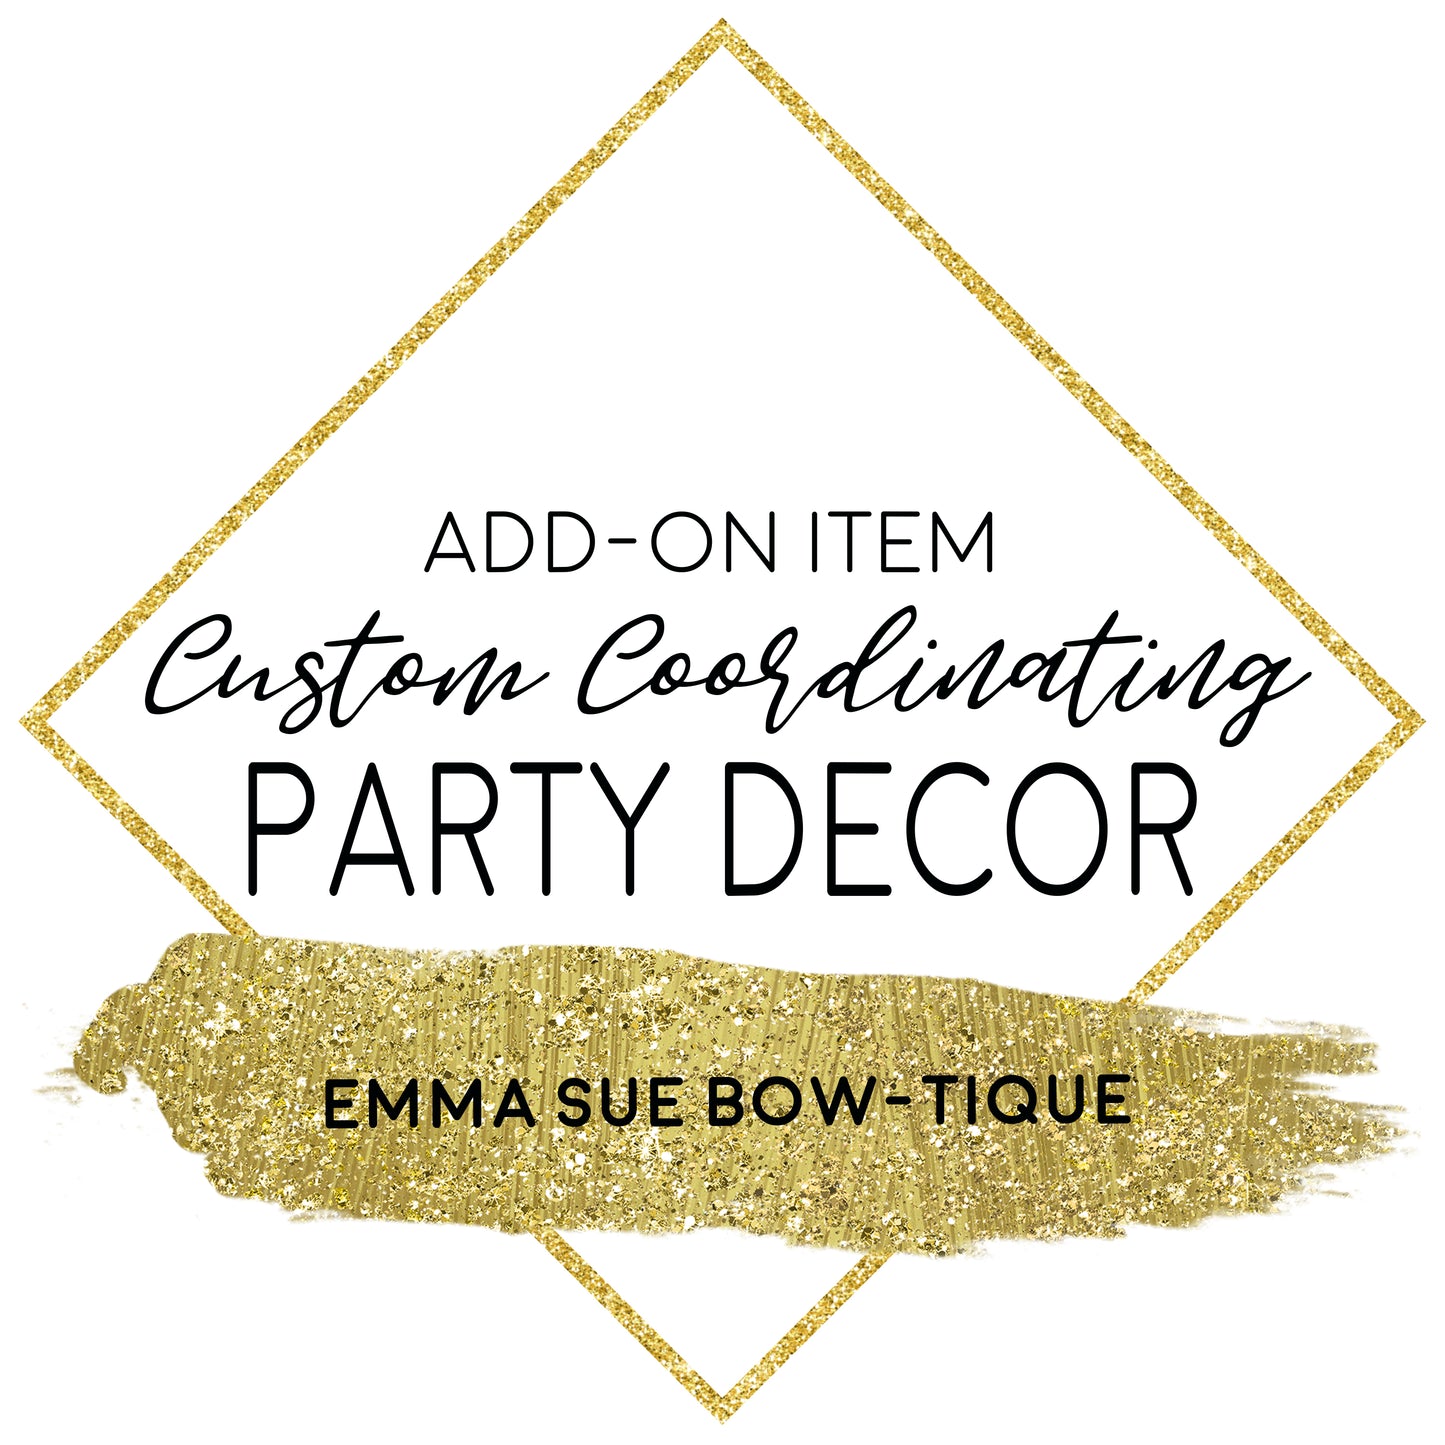 Custom Coordinating Party Decor to Match any Invitation Design - Digital Files - ADD ON ITEM ONLY!